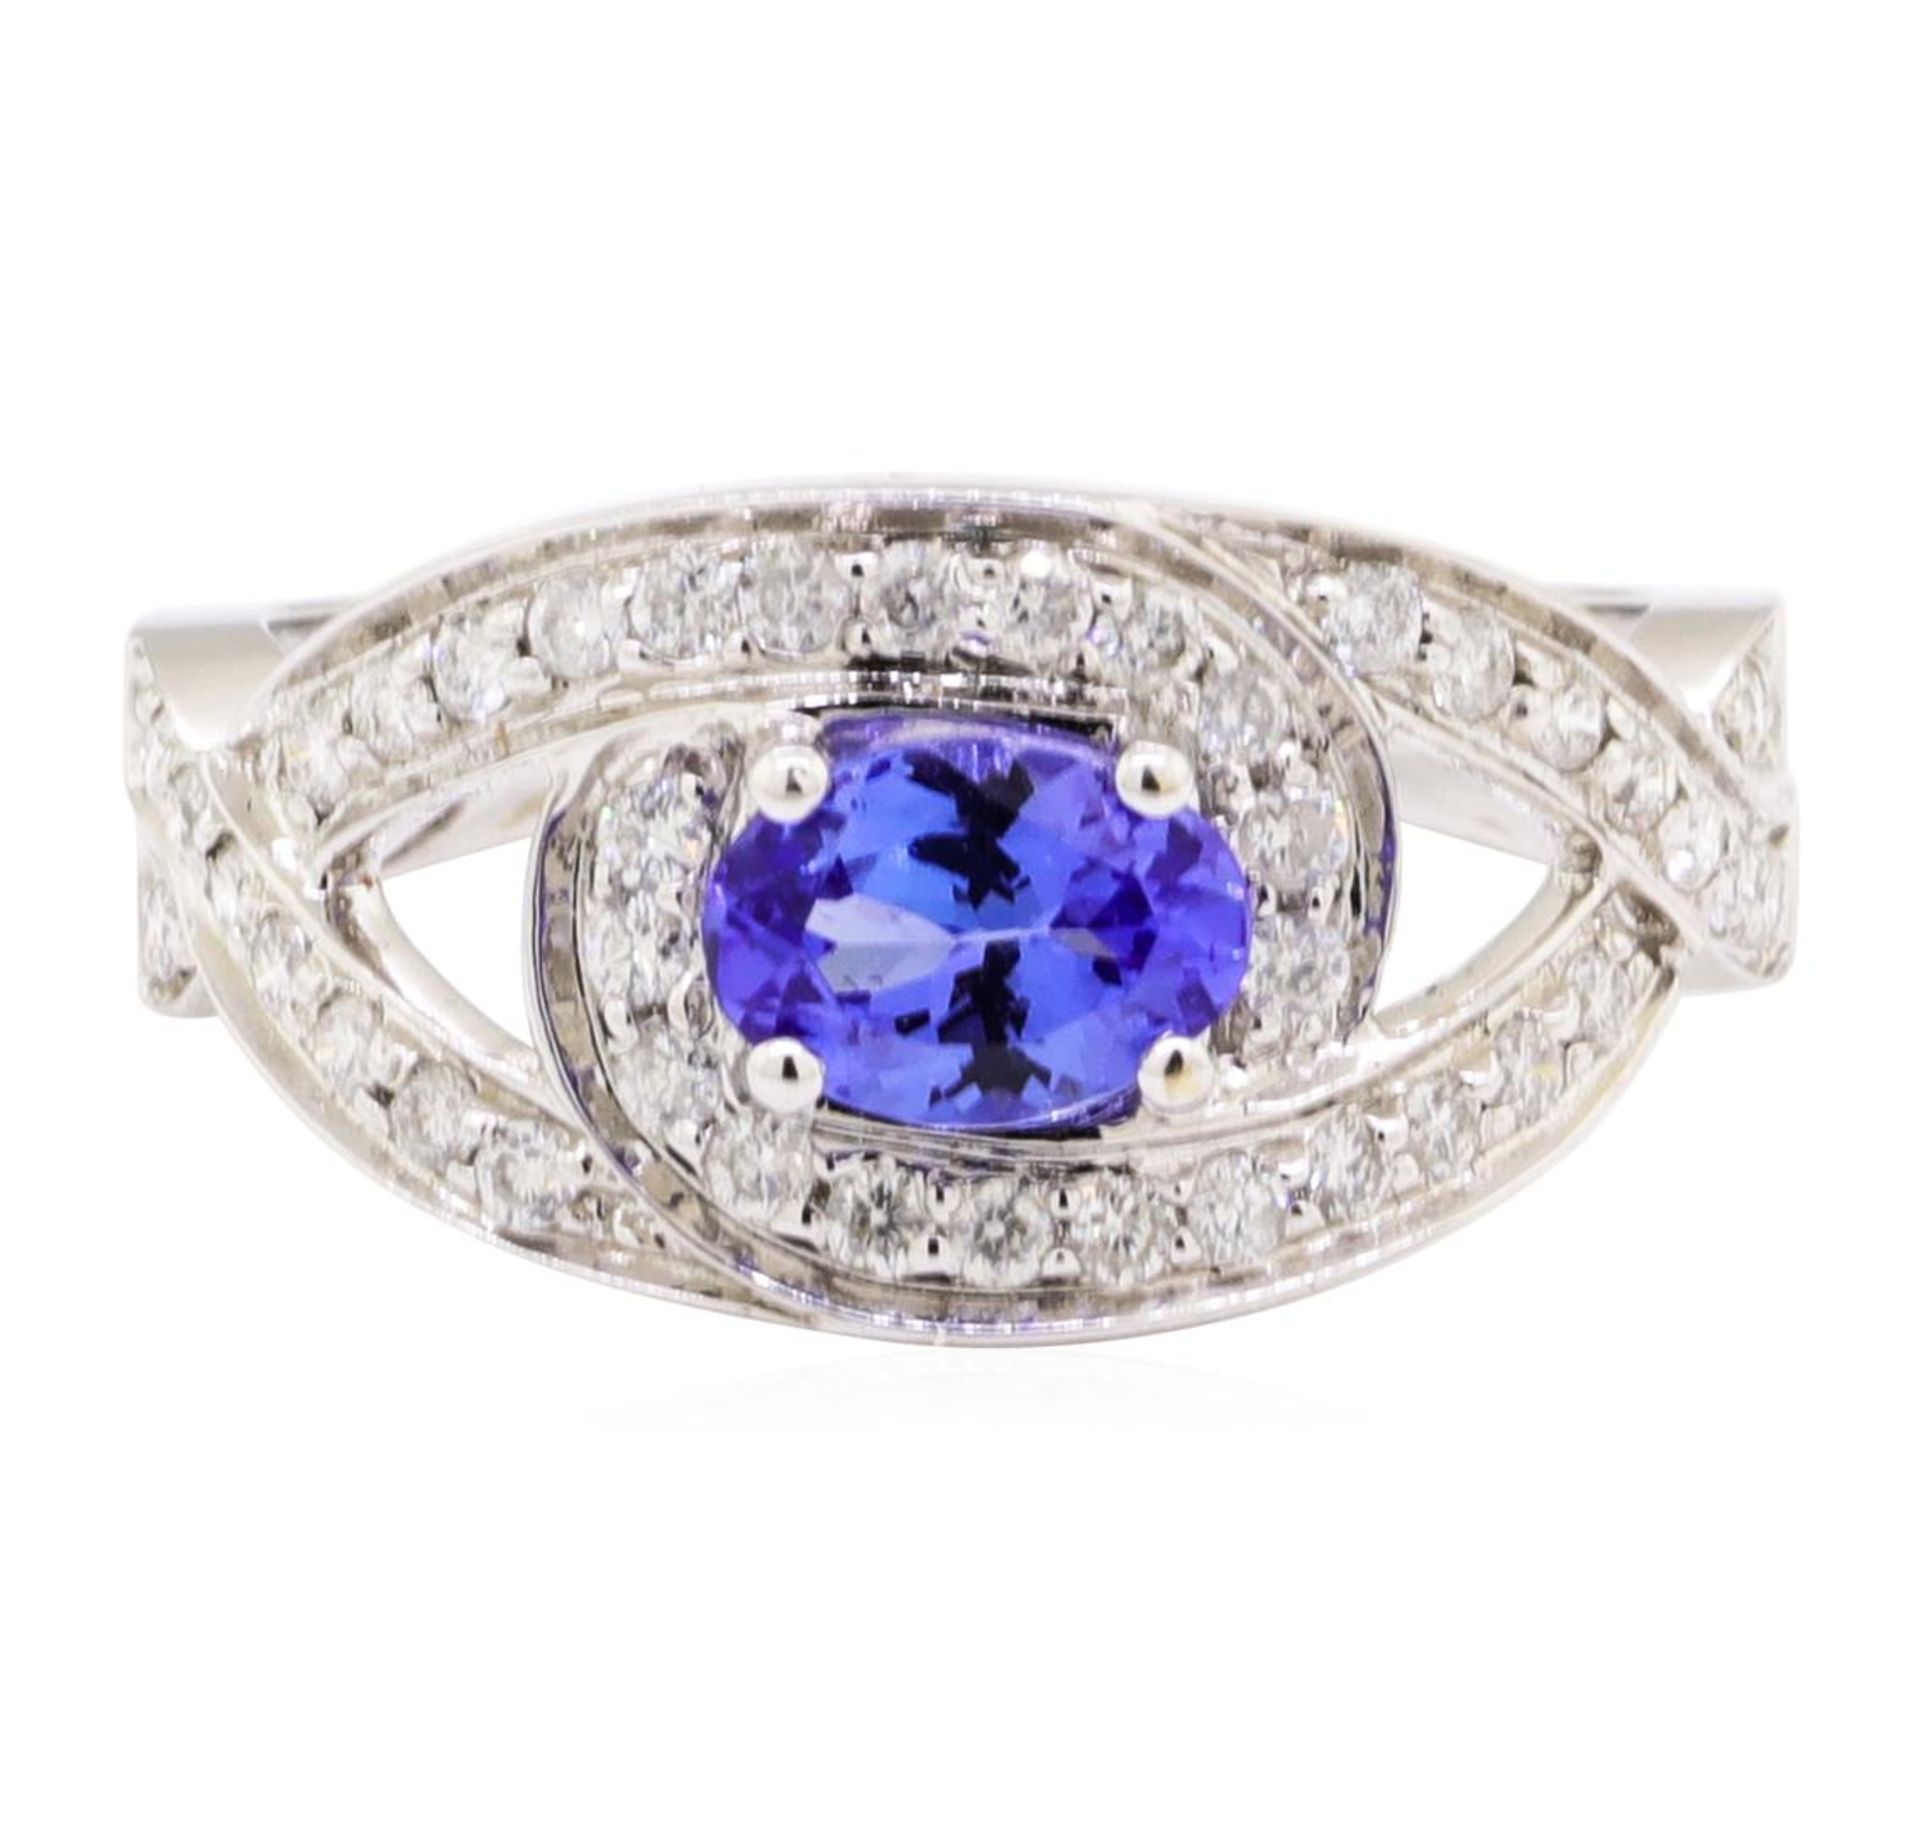 1.22 ctw Oval Mixed Tanzanite And Round Brilliant Cut Diamond Ring - 14KT White - Image 2 of 5